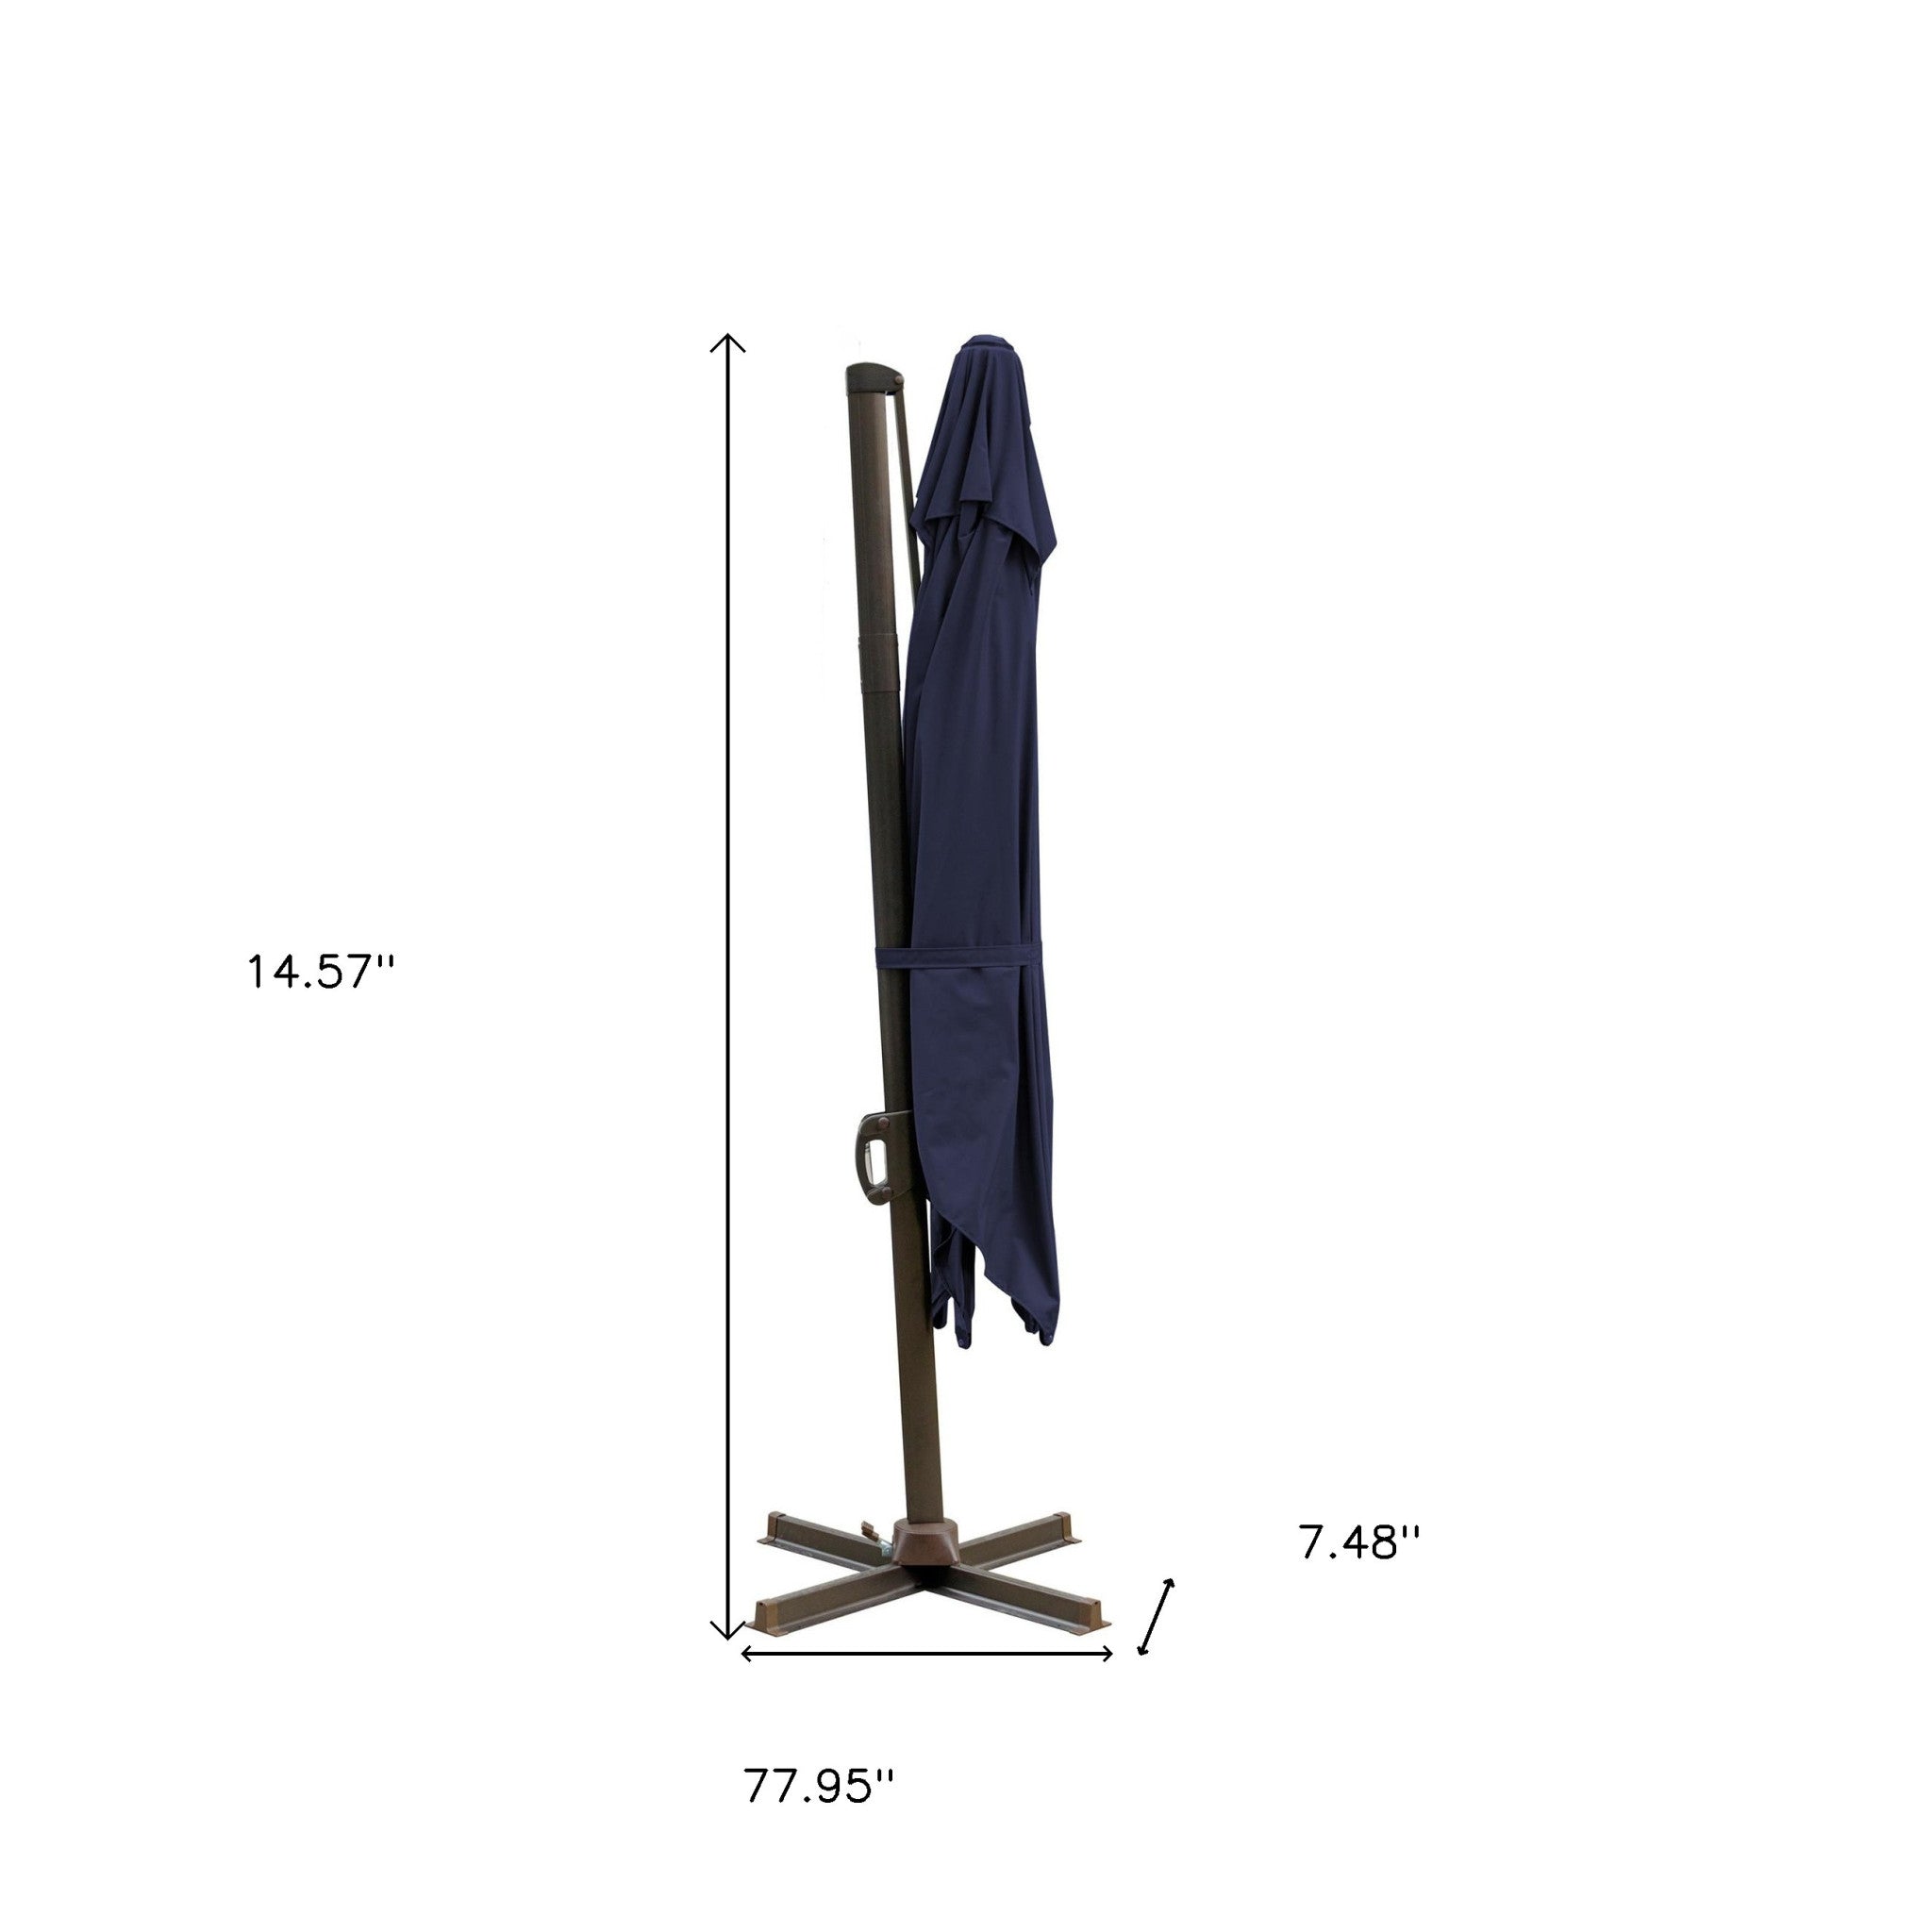 10' Navy Blue Polyester Square Tilt Cantilever Patio Umbrella With Stand